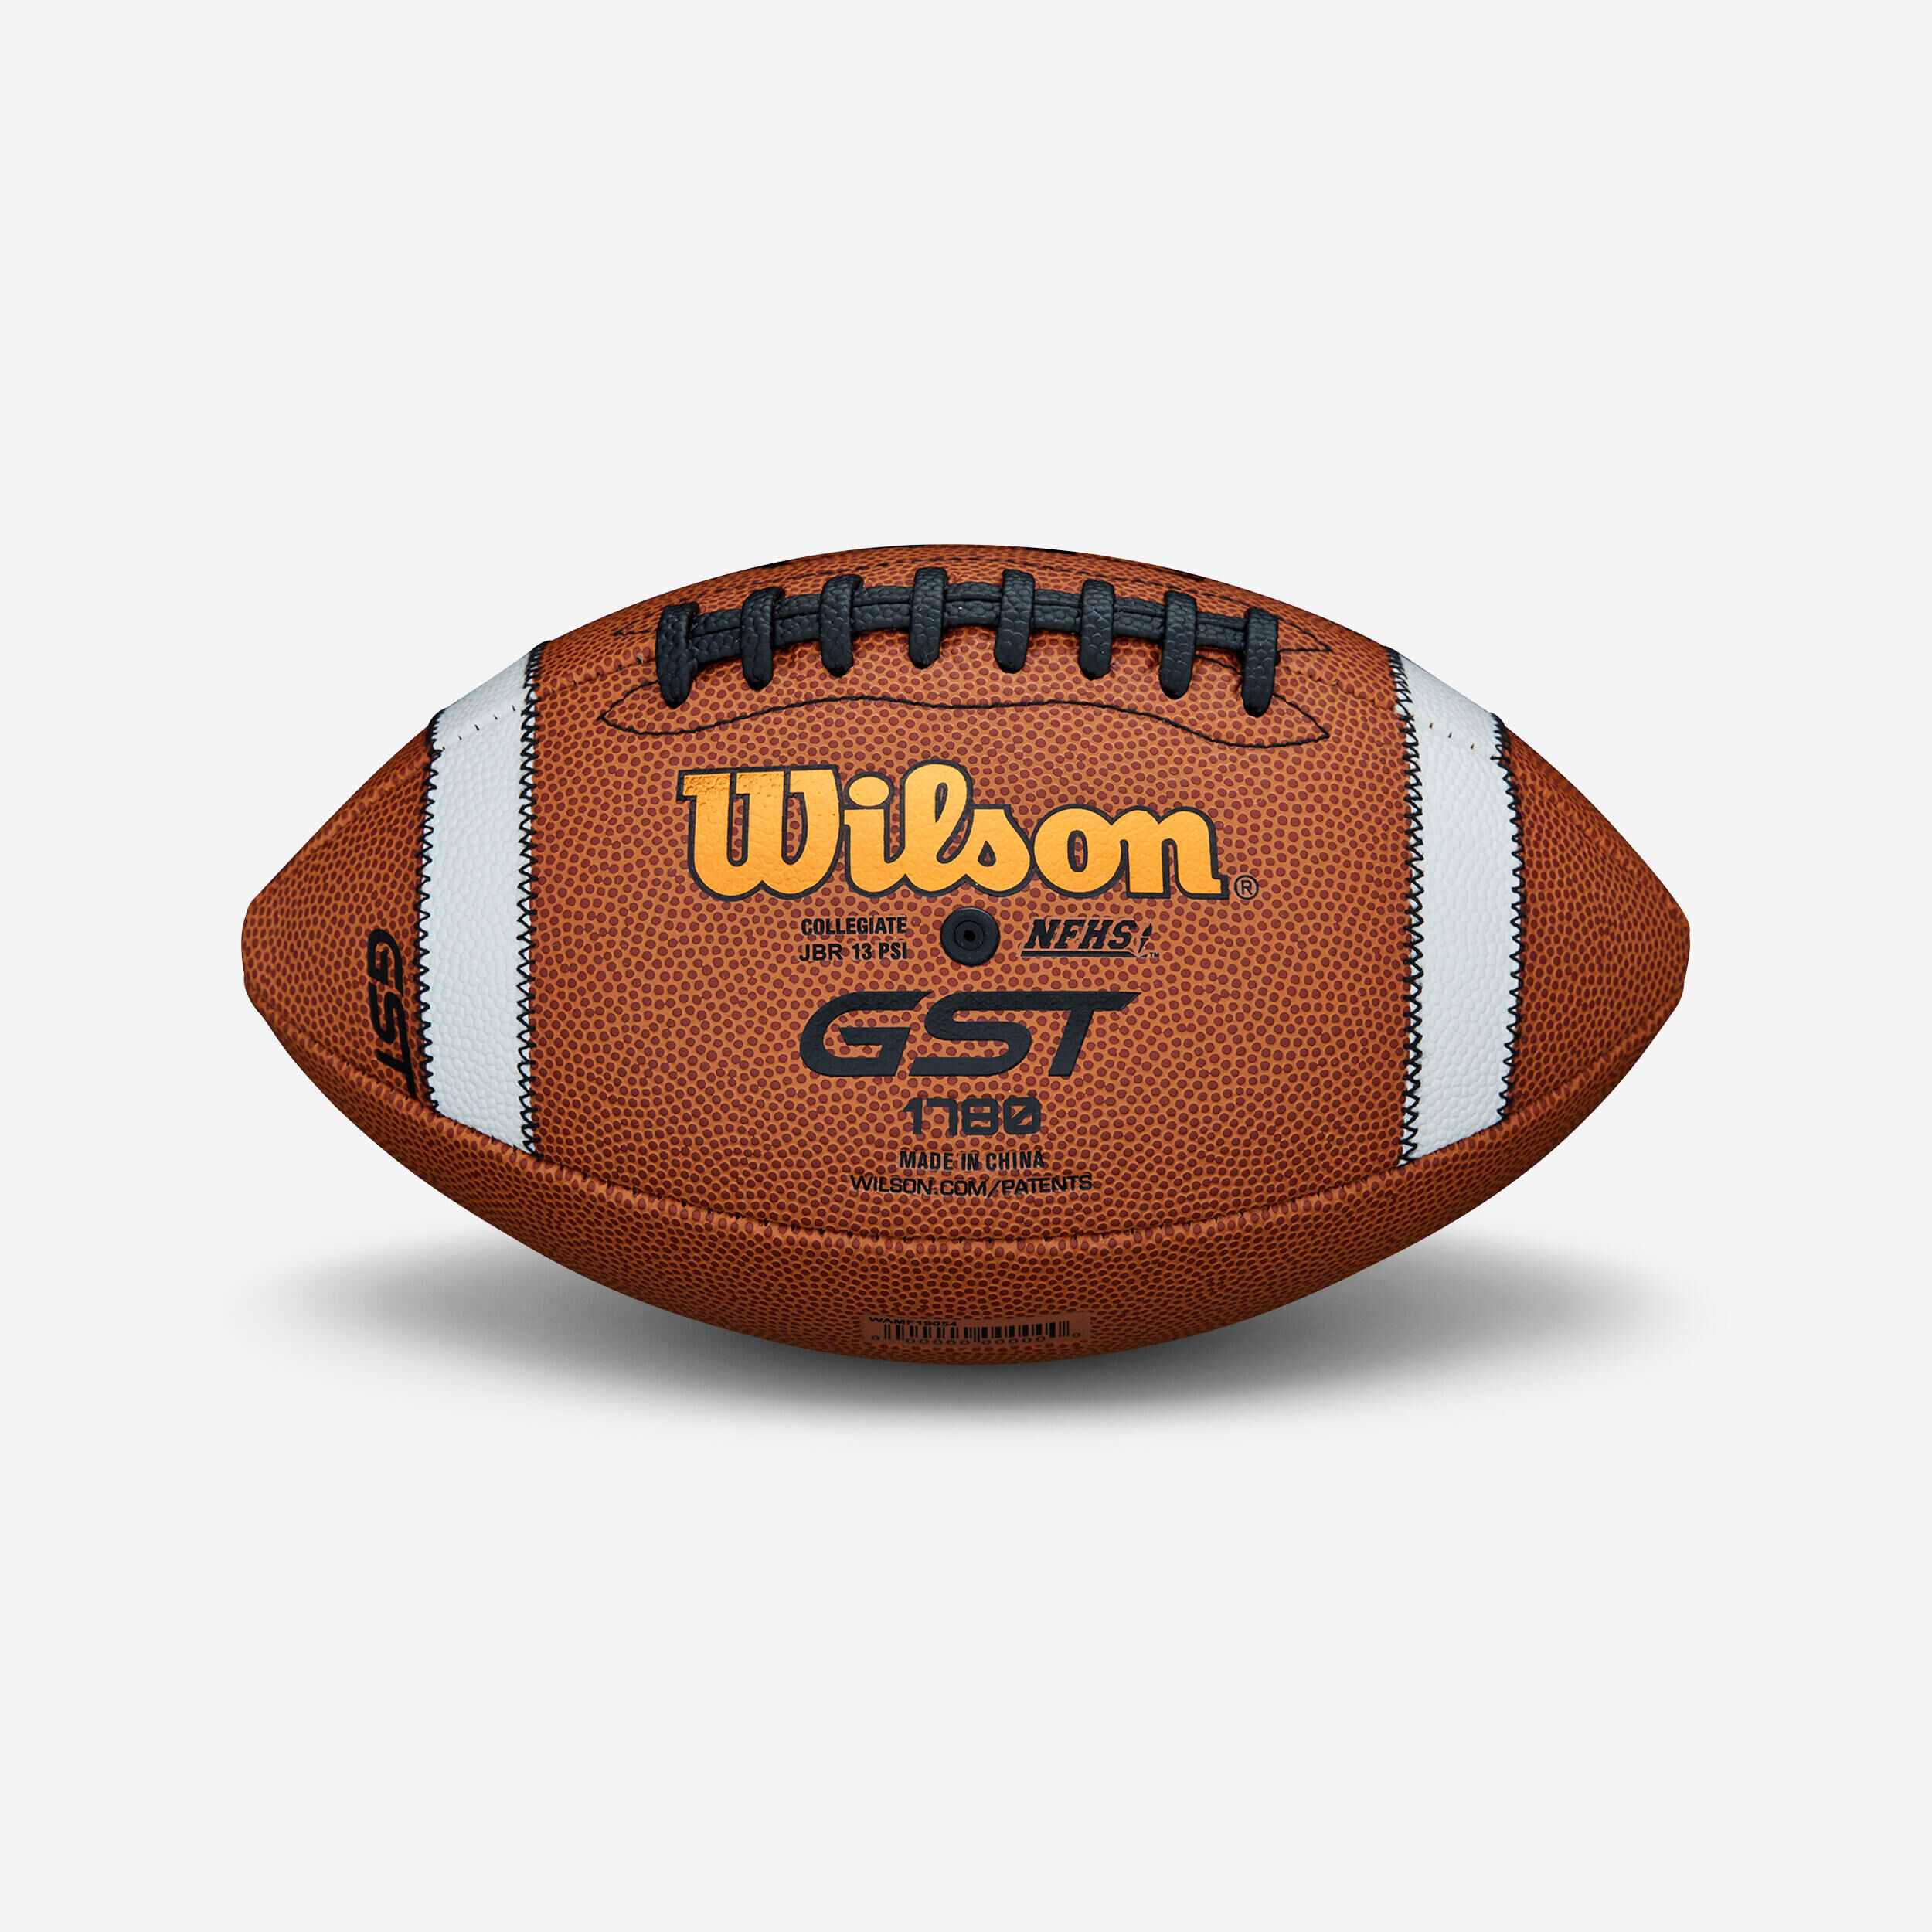 WILSON Adult American Football GST Composite Official - Brown